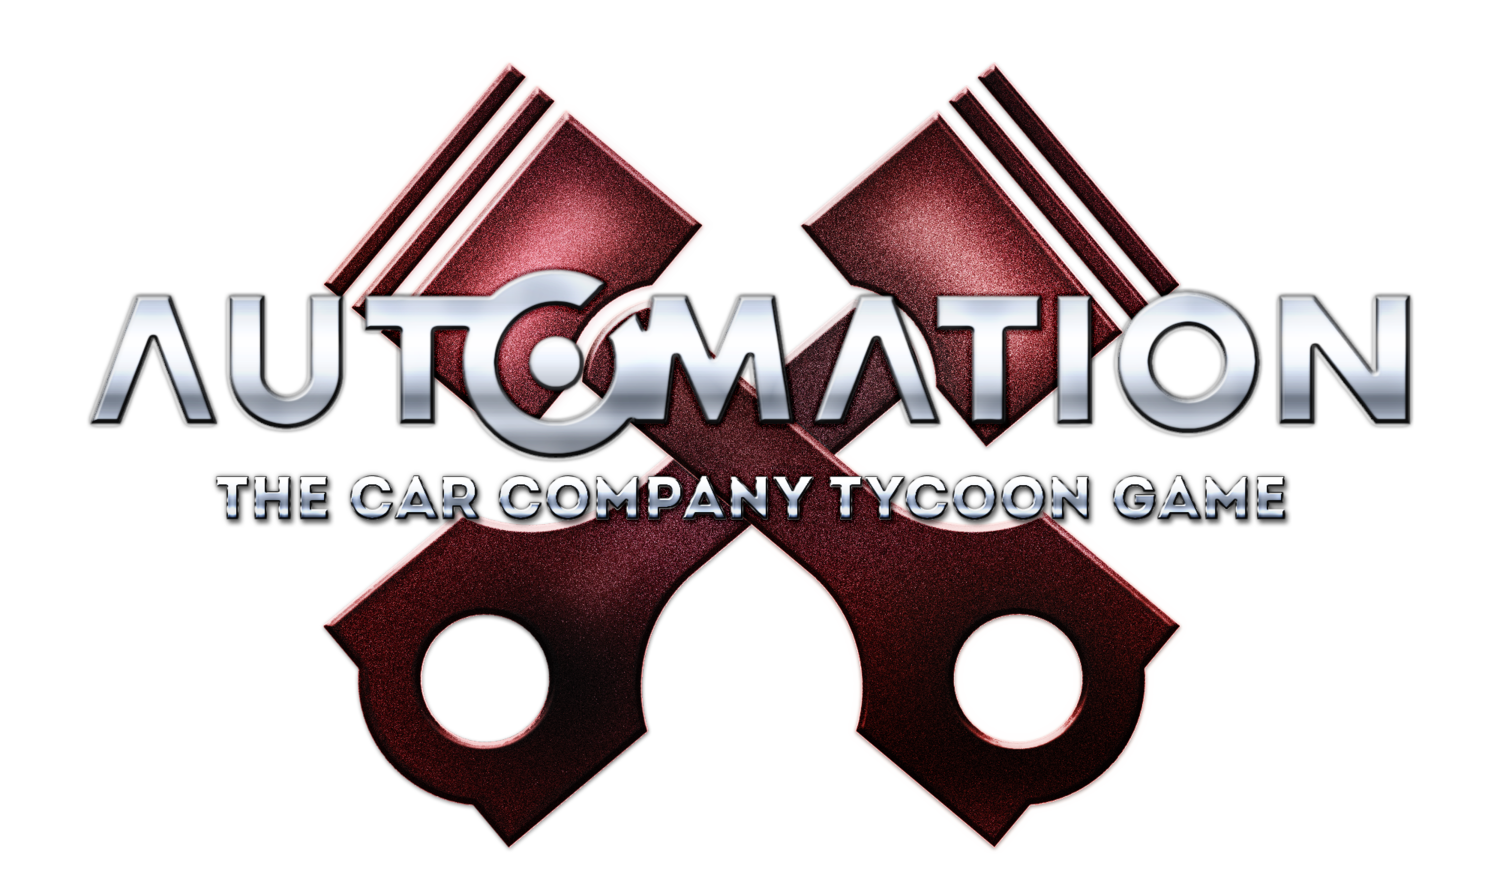 Image of Automation - The Car Company Tycoon Game